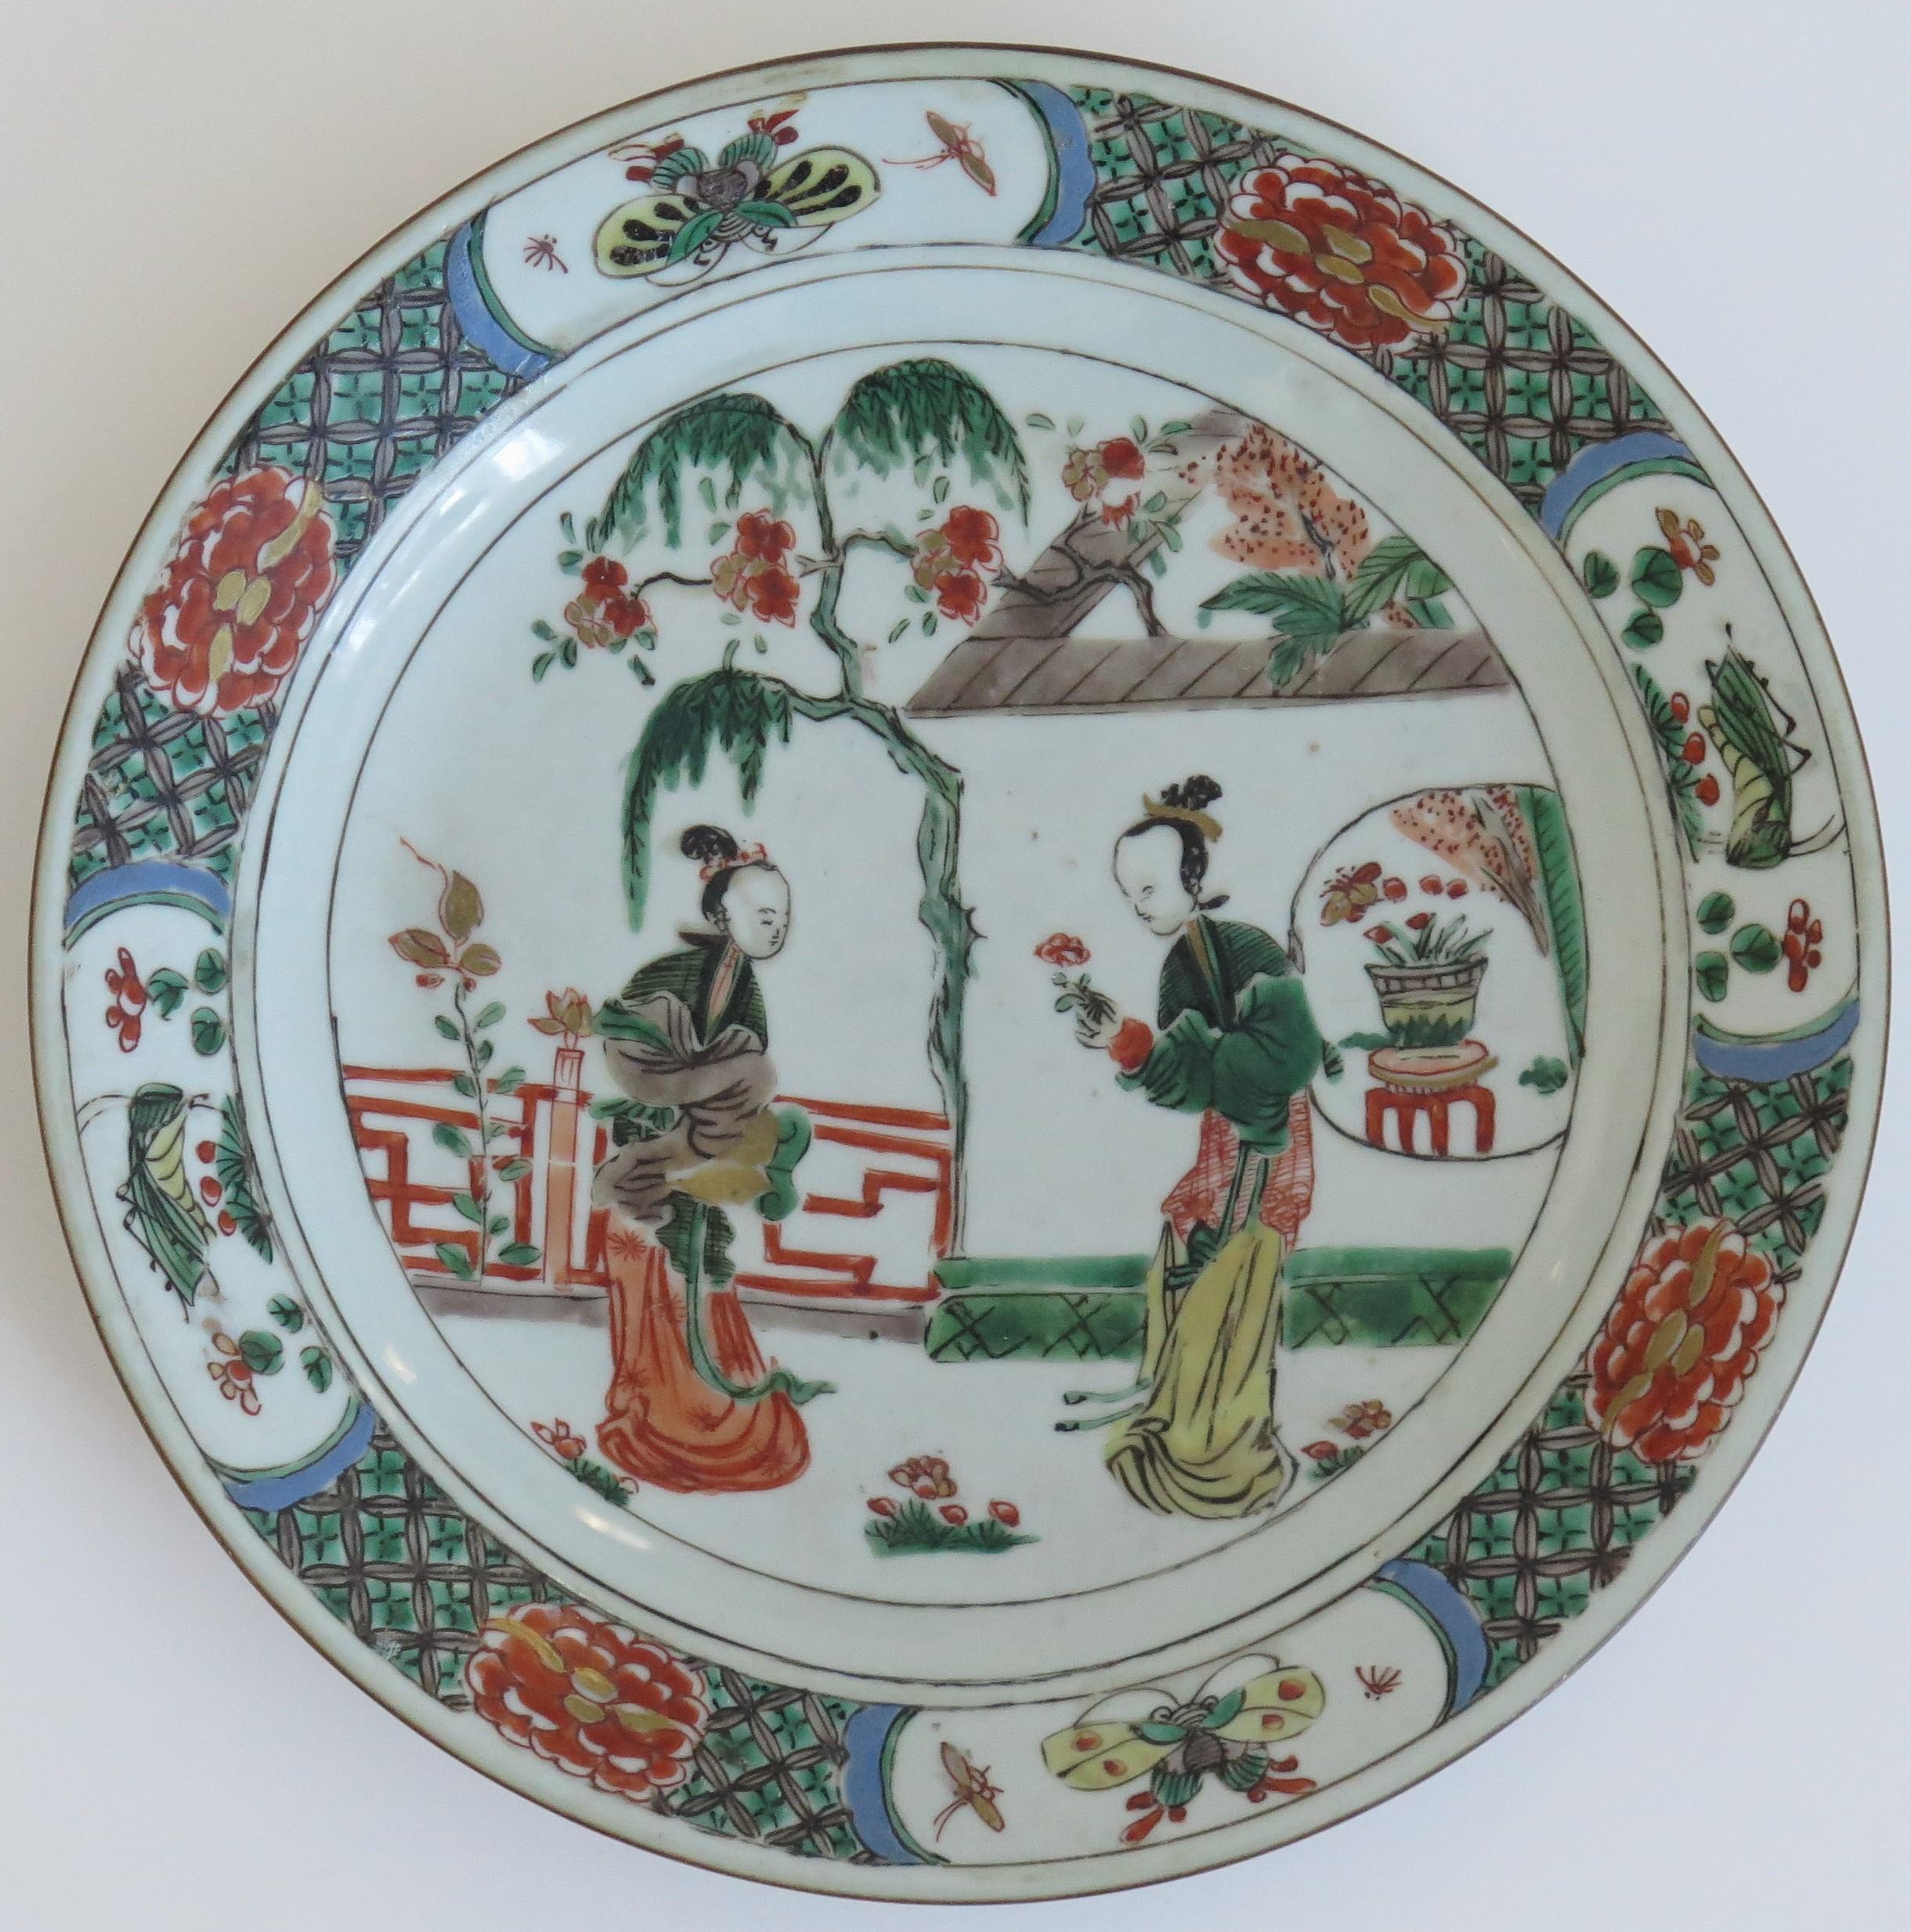 This is a very beautifully hand painted Chinese porcelain 